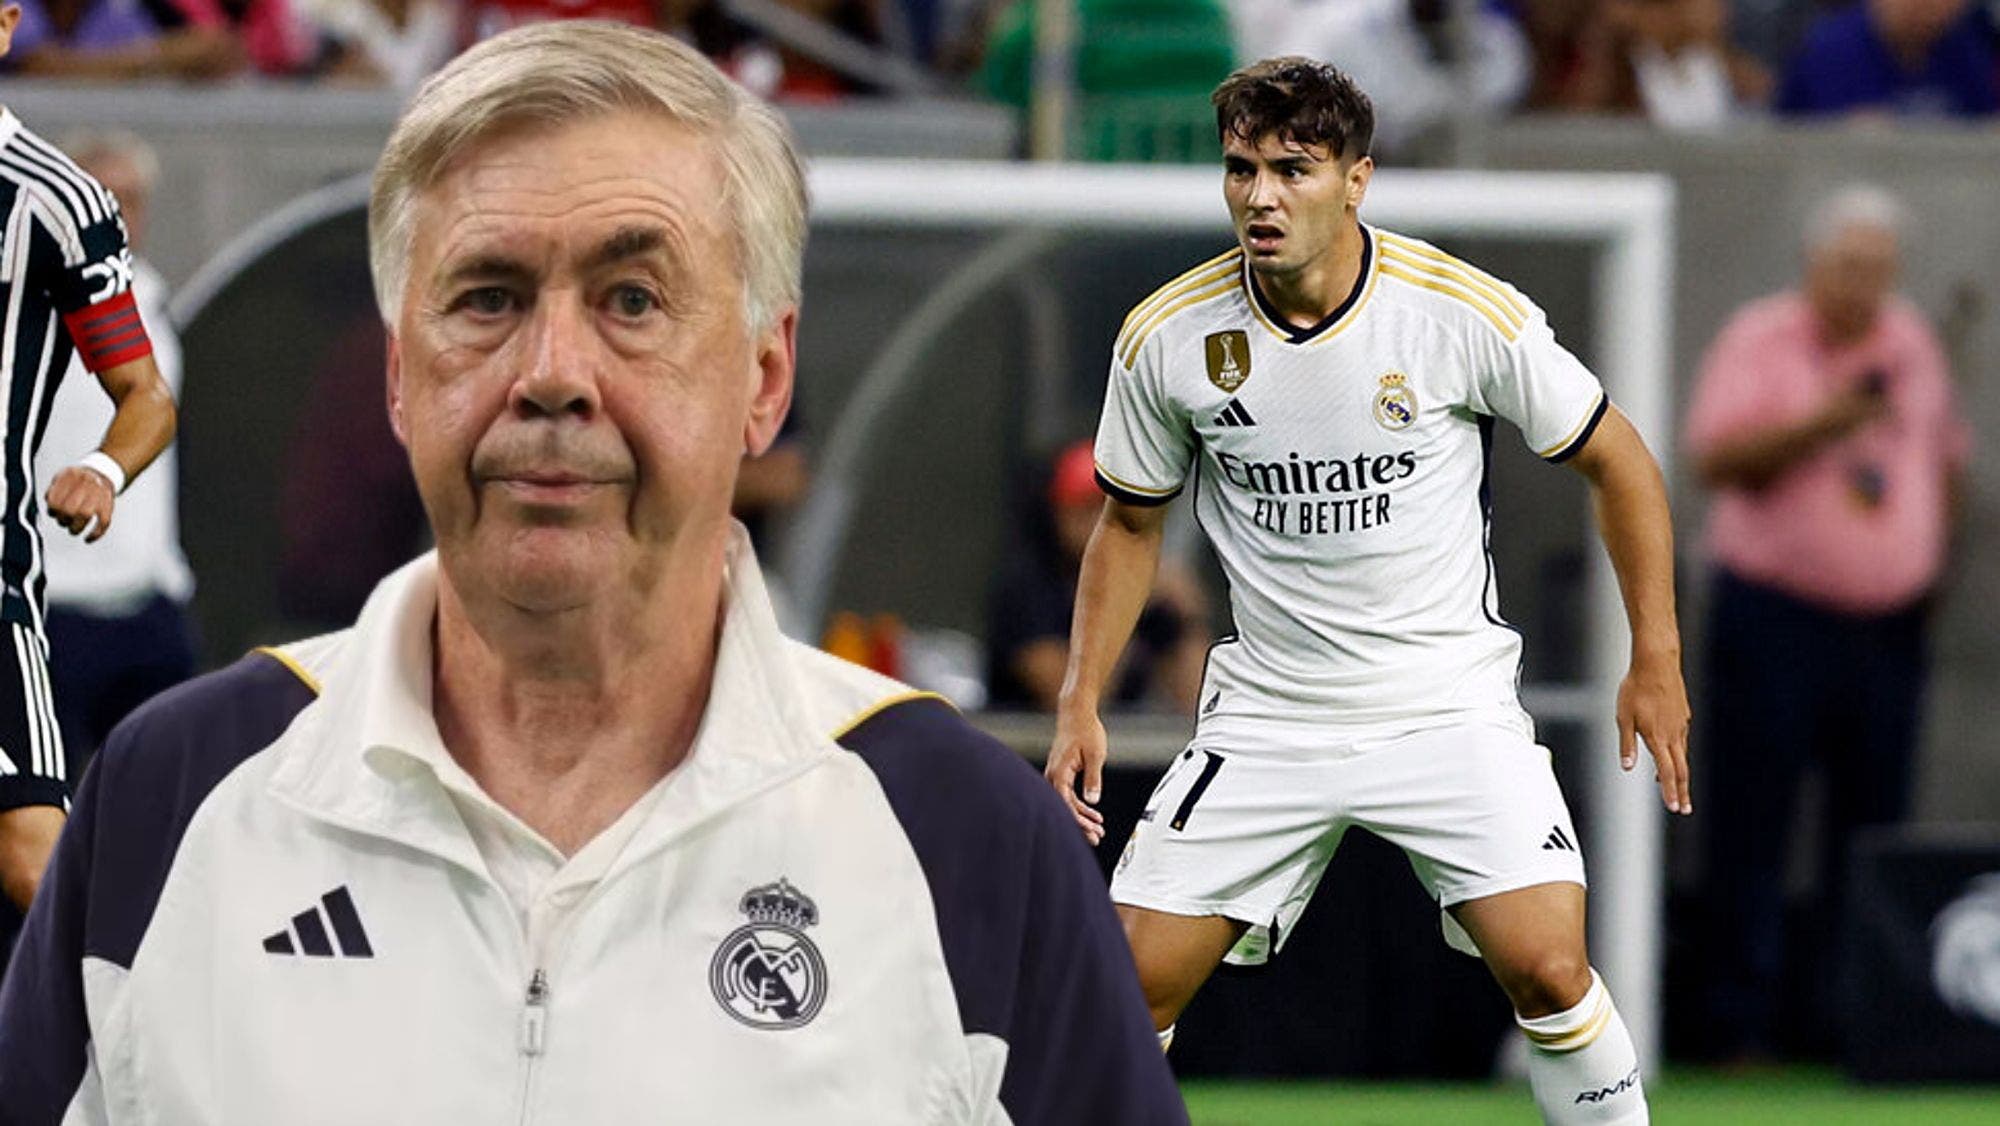 Brahim Díaz poses an unexpected problem for Real Madrid: Ancelotti wants him out
	

